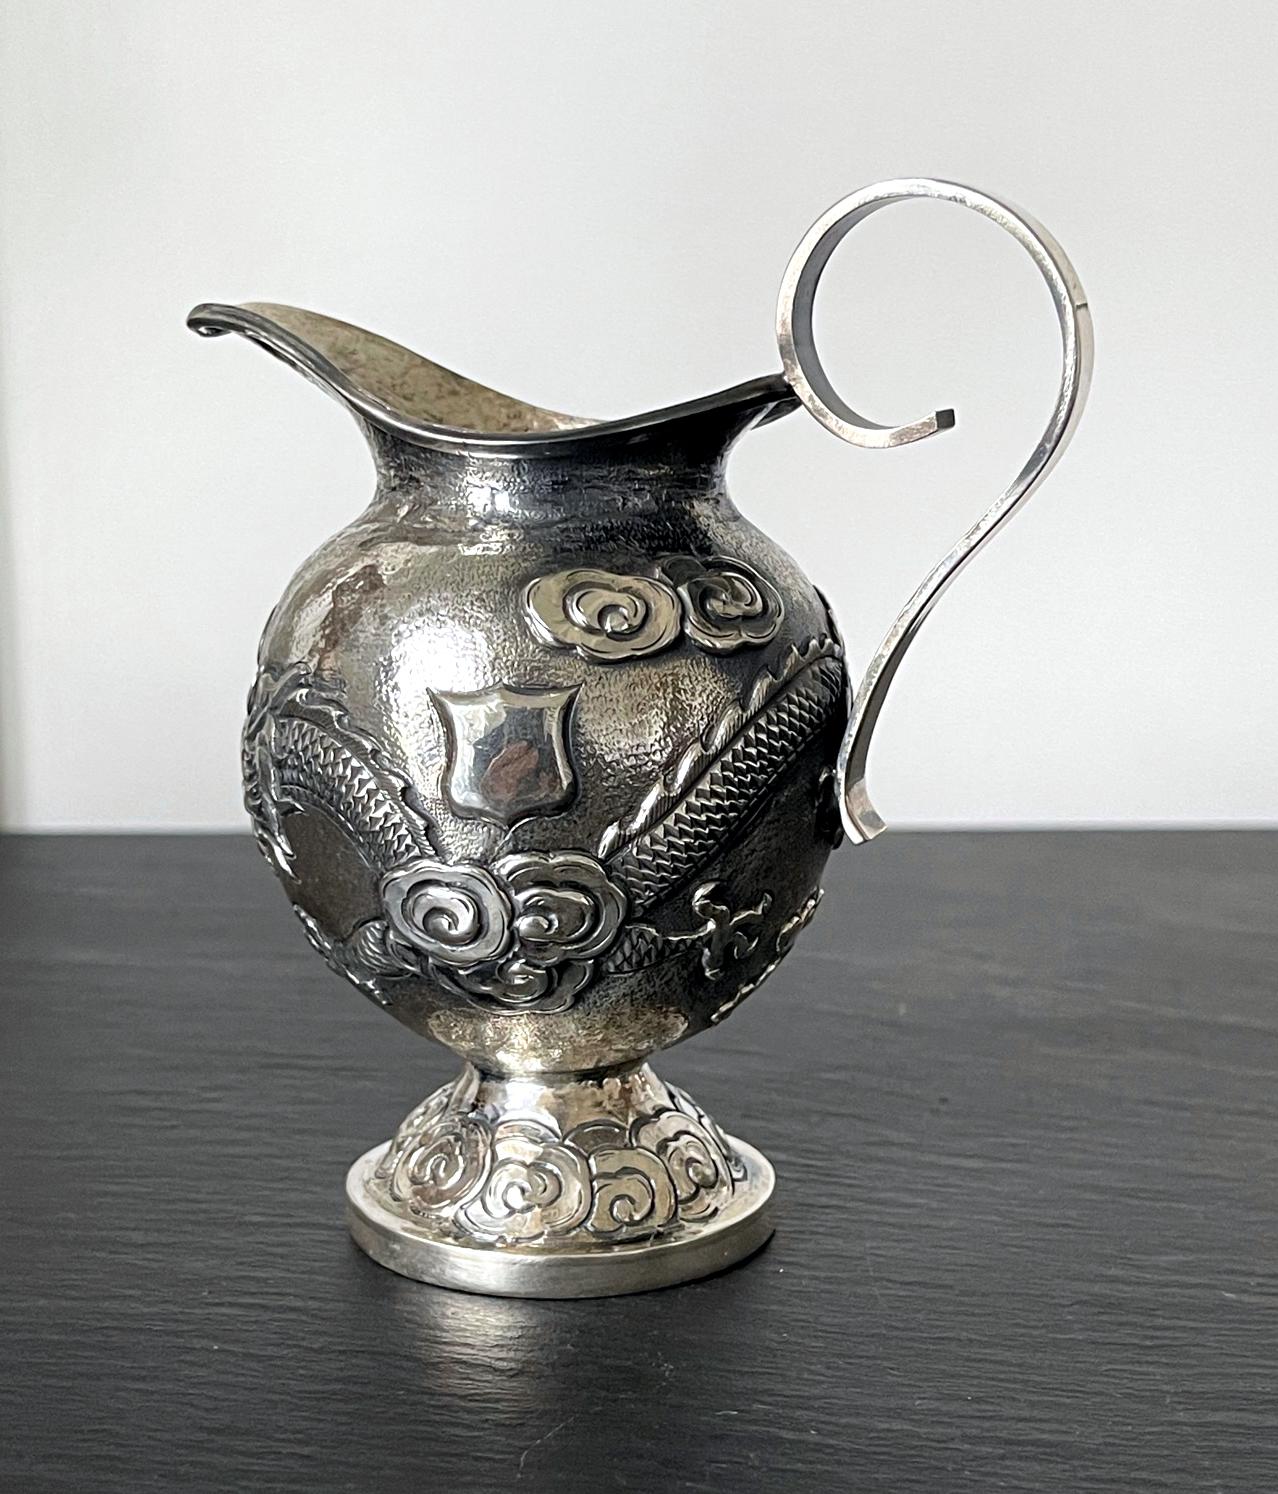 Chinese Export Silver Tea or Coffee Service by ZeeSung In Good Condition For Sale In Atlanta, GA